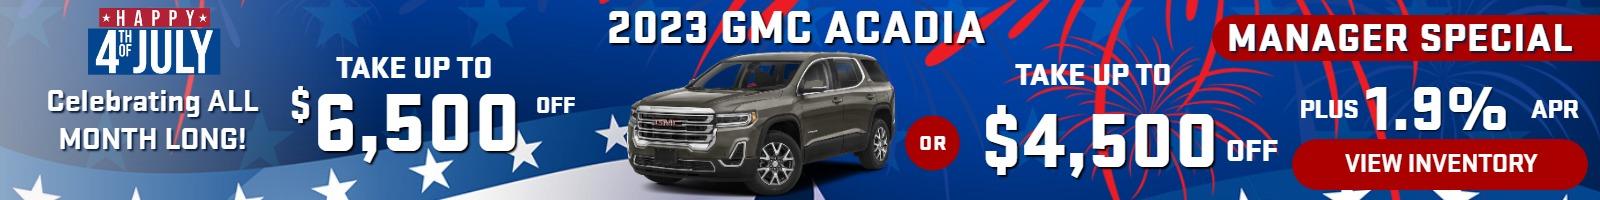 2023 GMC Acadia 

Stock G6258

 take up to 
$6500 OFF

OR 

take up to 
$4500 OFF 
PLUS 1.9% finance